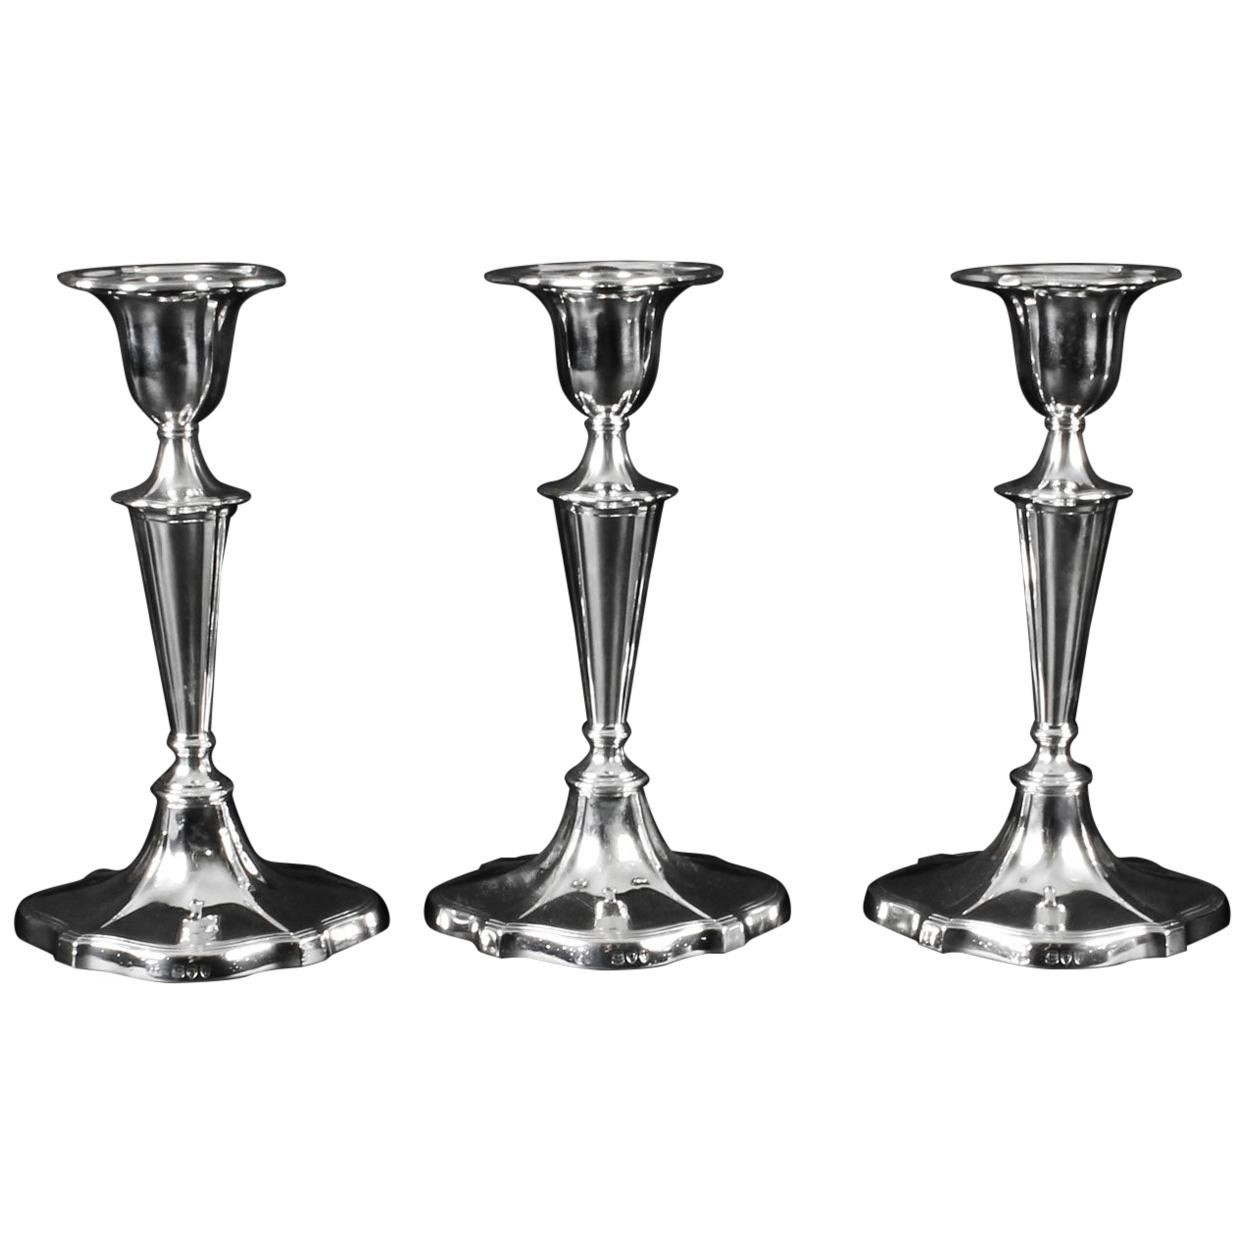 Antique Set of 3 Sterling Silver Candlesticks William Gibson & John Langman 1895 For Sale